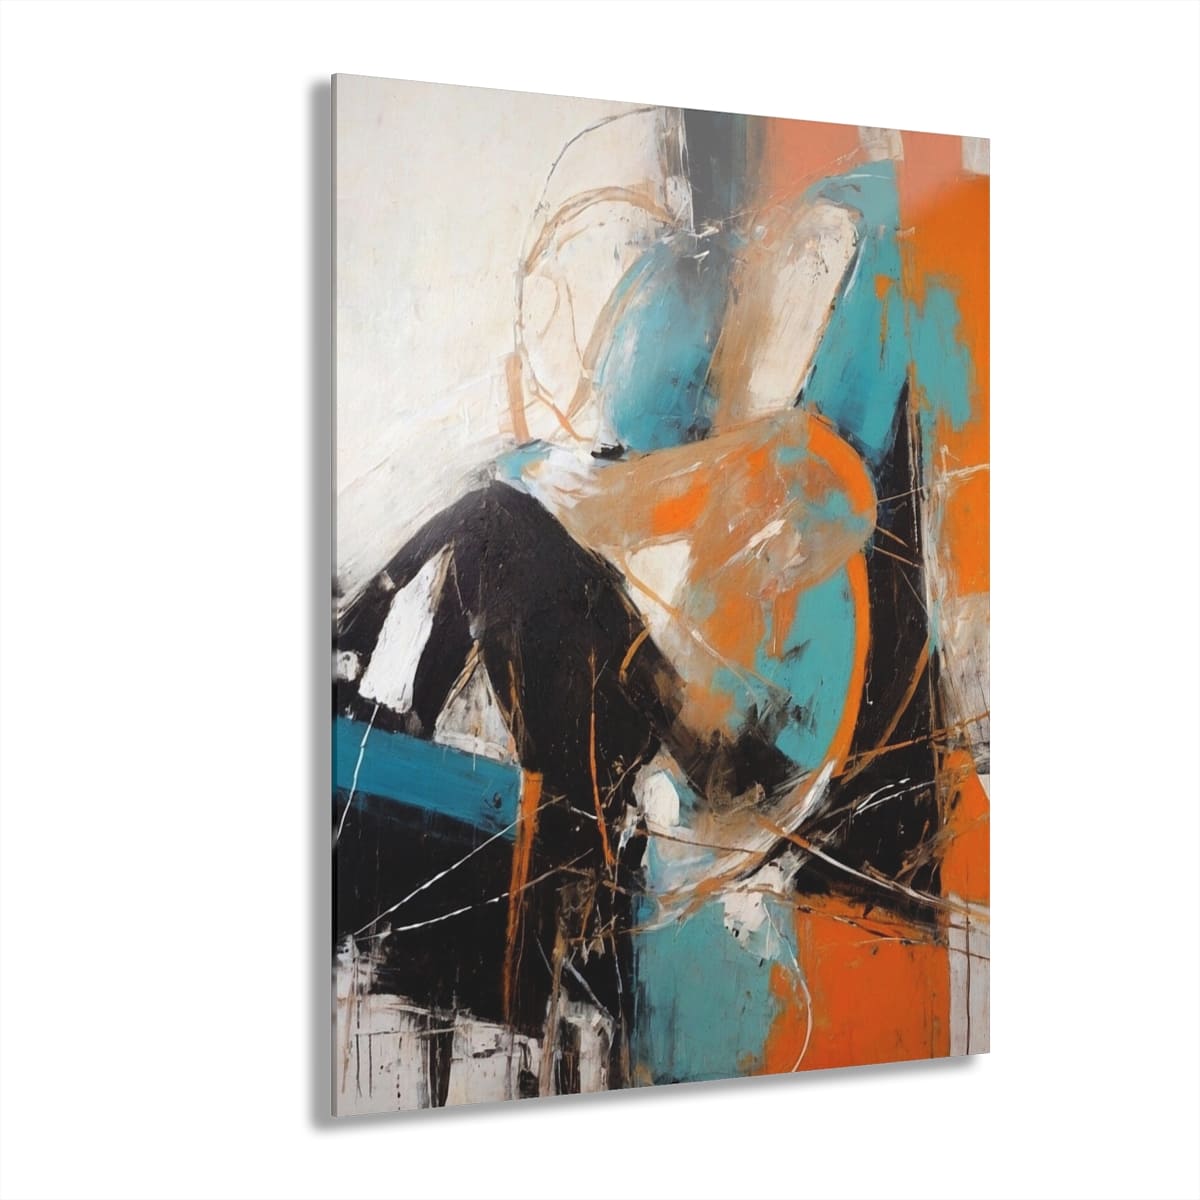 Modern Contemporary Abstract

artandpicturesforhotels.com/shop/modern-ab…

#Modern #Abstract #AbstractArt #ArtForHotels #Contemporary #ContemporaryAbstract #LimitedEdition